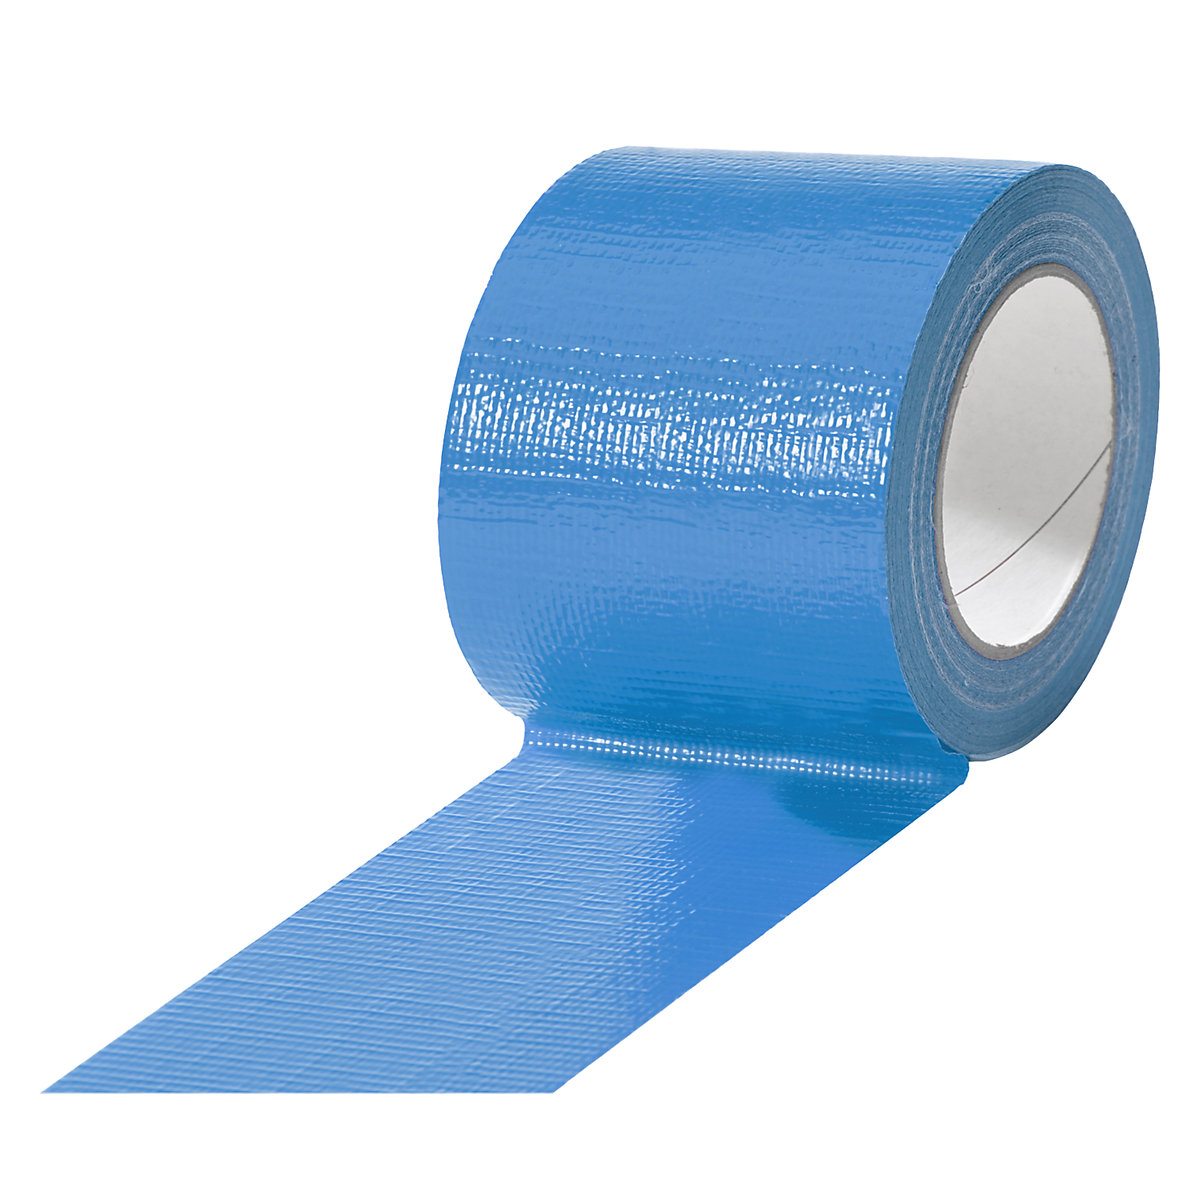 Fabric tape, in different colours, pack of 12 rolls, blue, tape width 75 mm-11